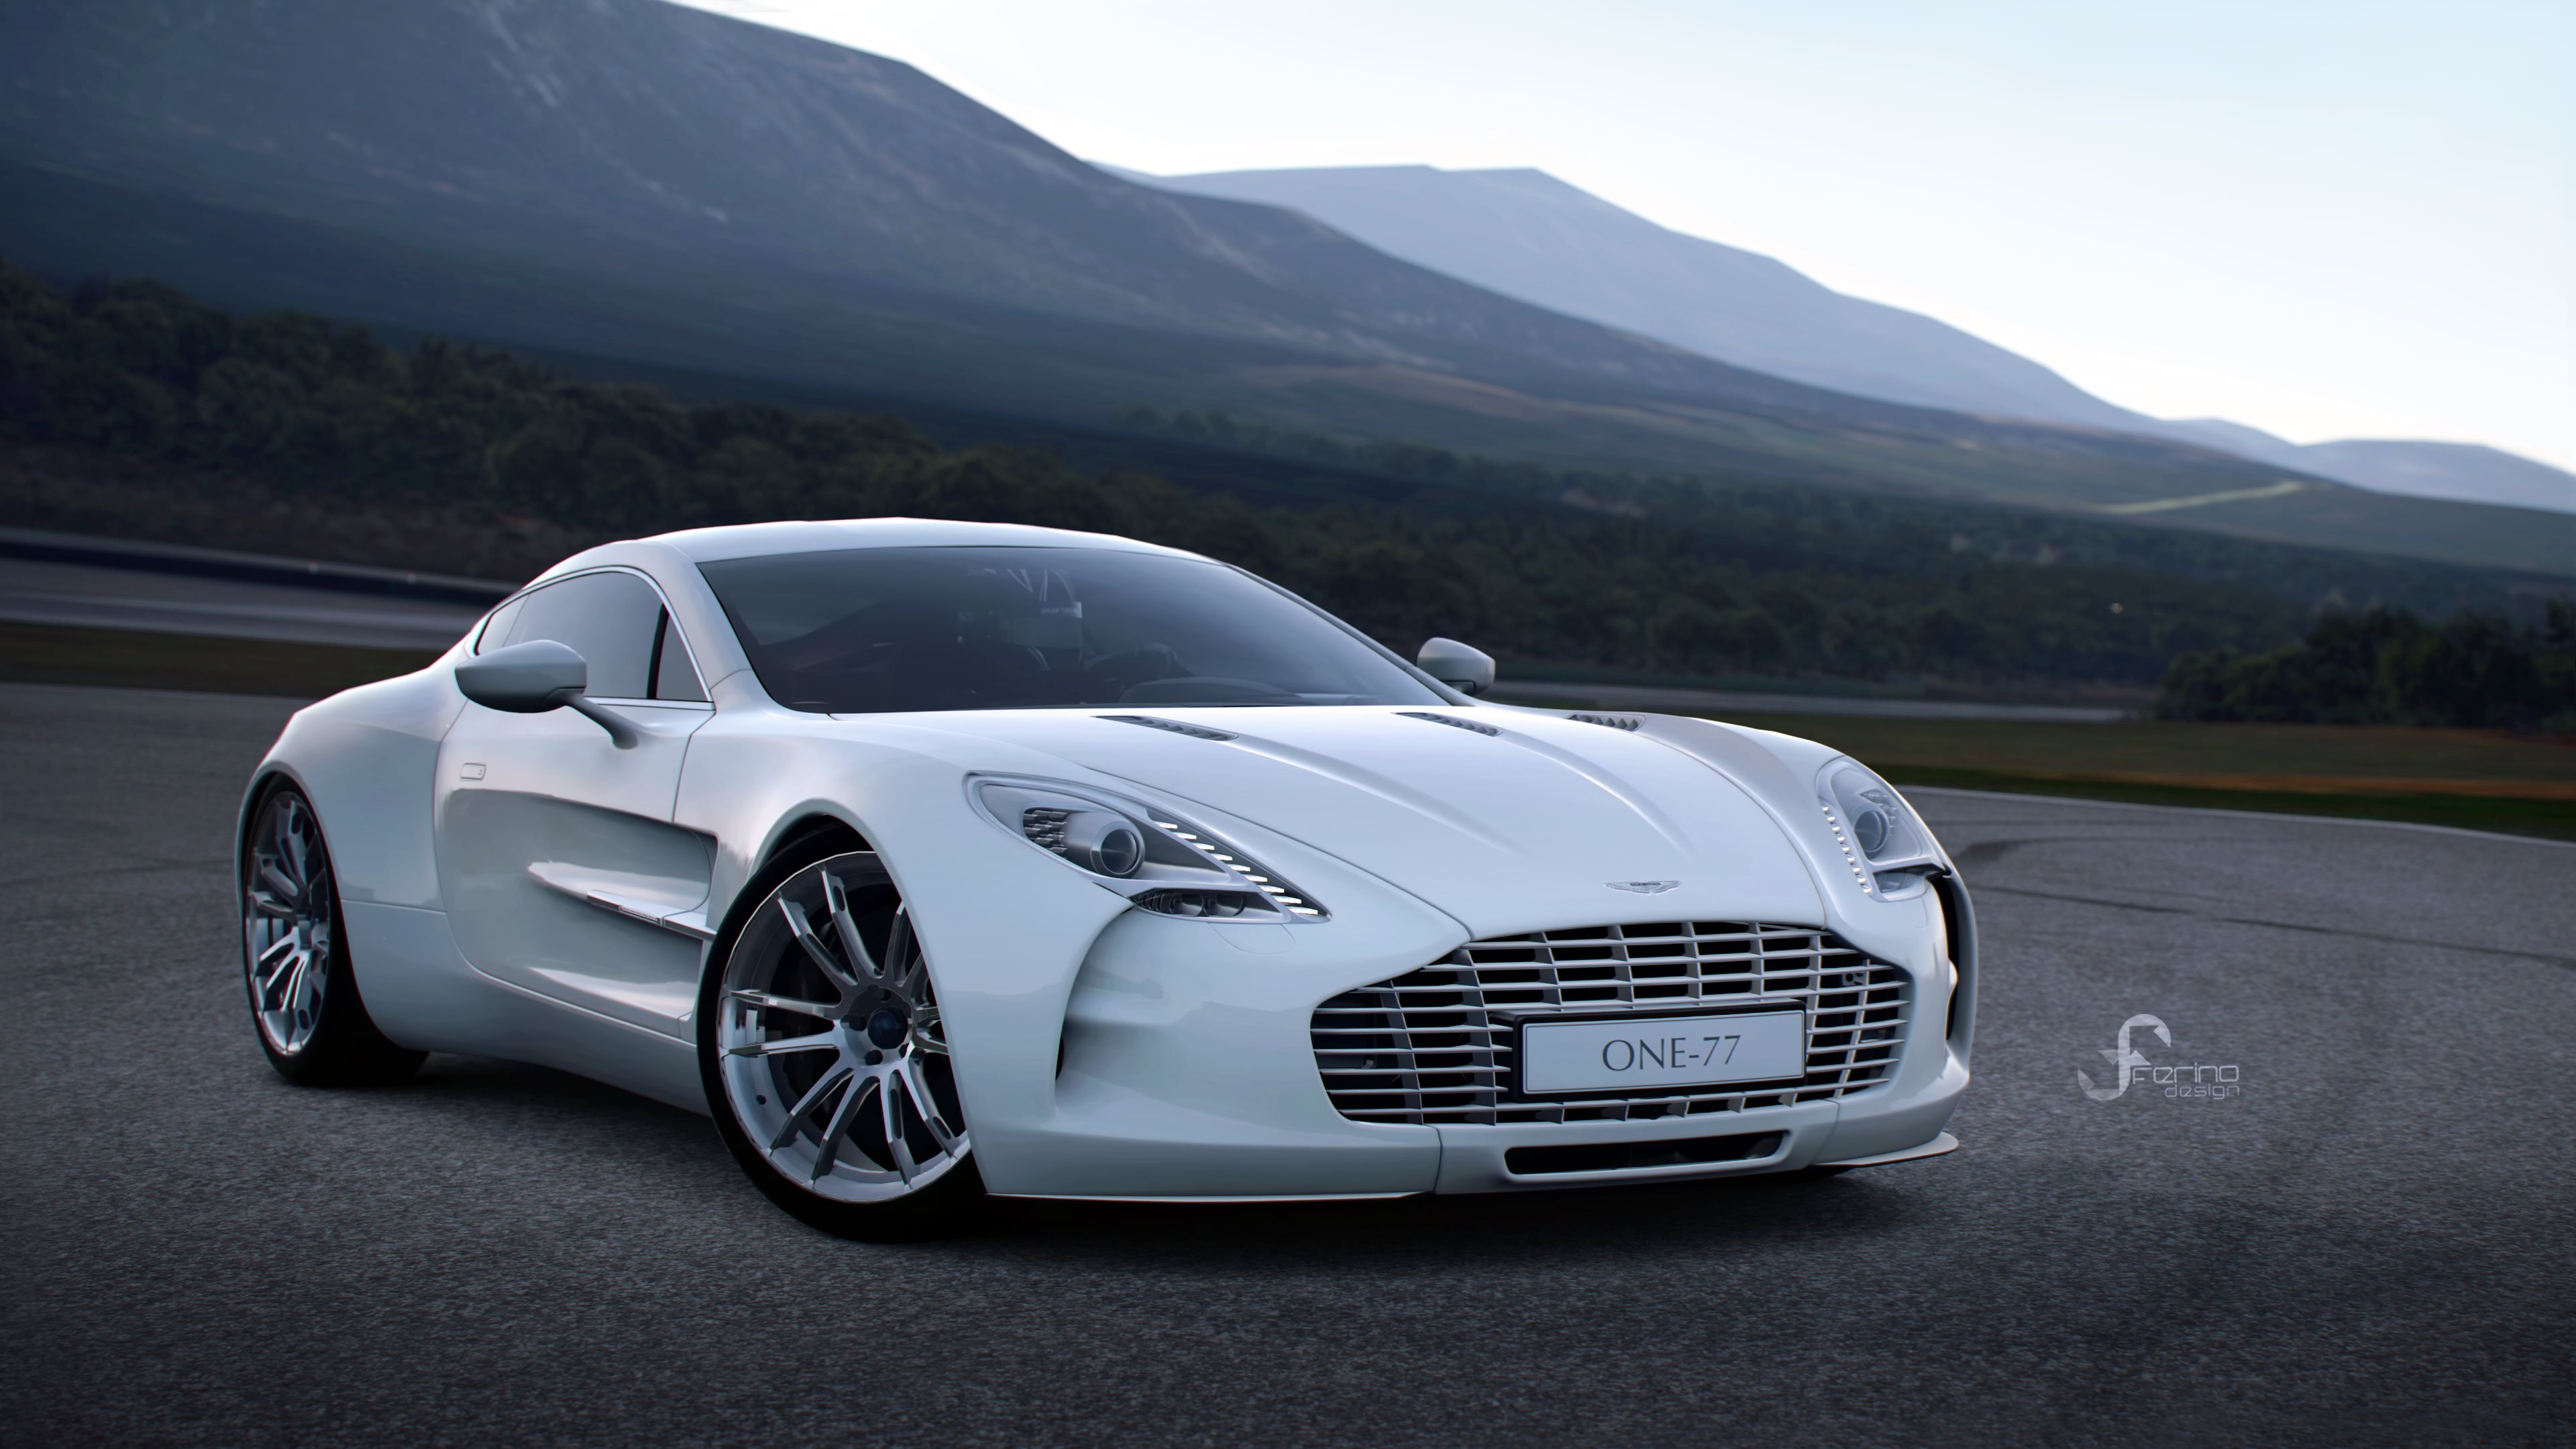 Amazing Aston Martin One-77 Pictures & Backgrounds